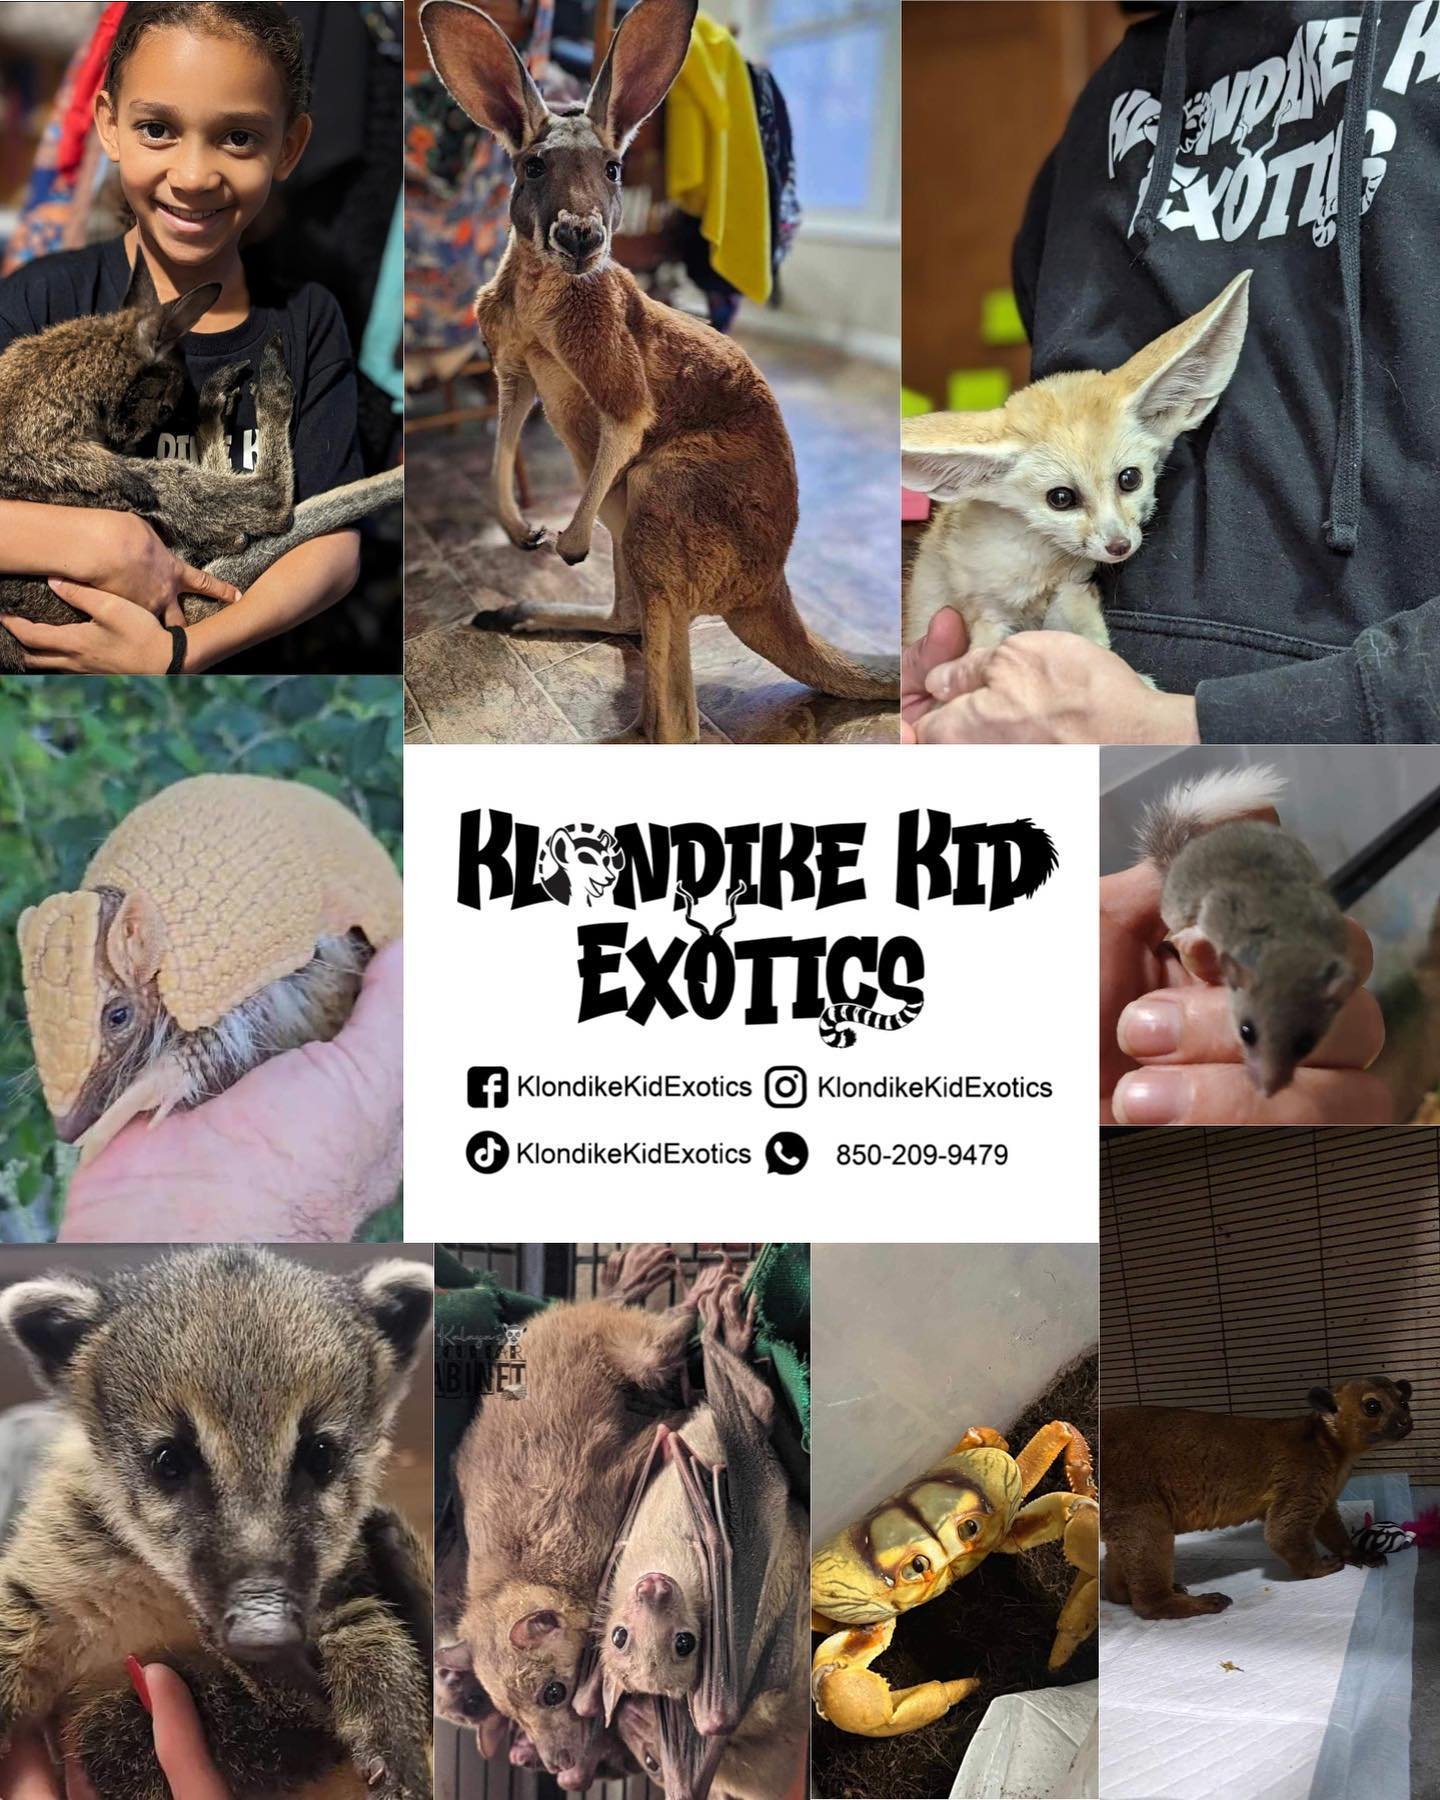 @klondikekidexotics will be joining us for our June 2nd show! 

Their passion for exotics runs deep! They are a USDA licensed facility with over 20 years of combined experience in the world of exotic animals. From breeding, transport, educational and